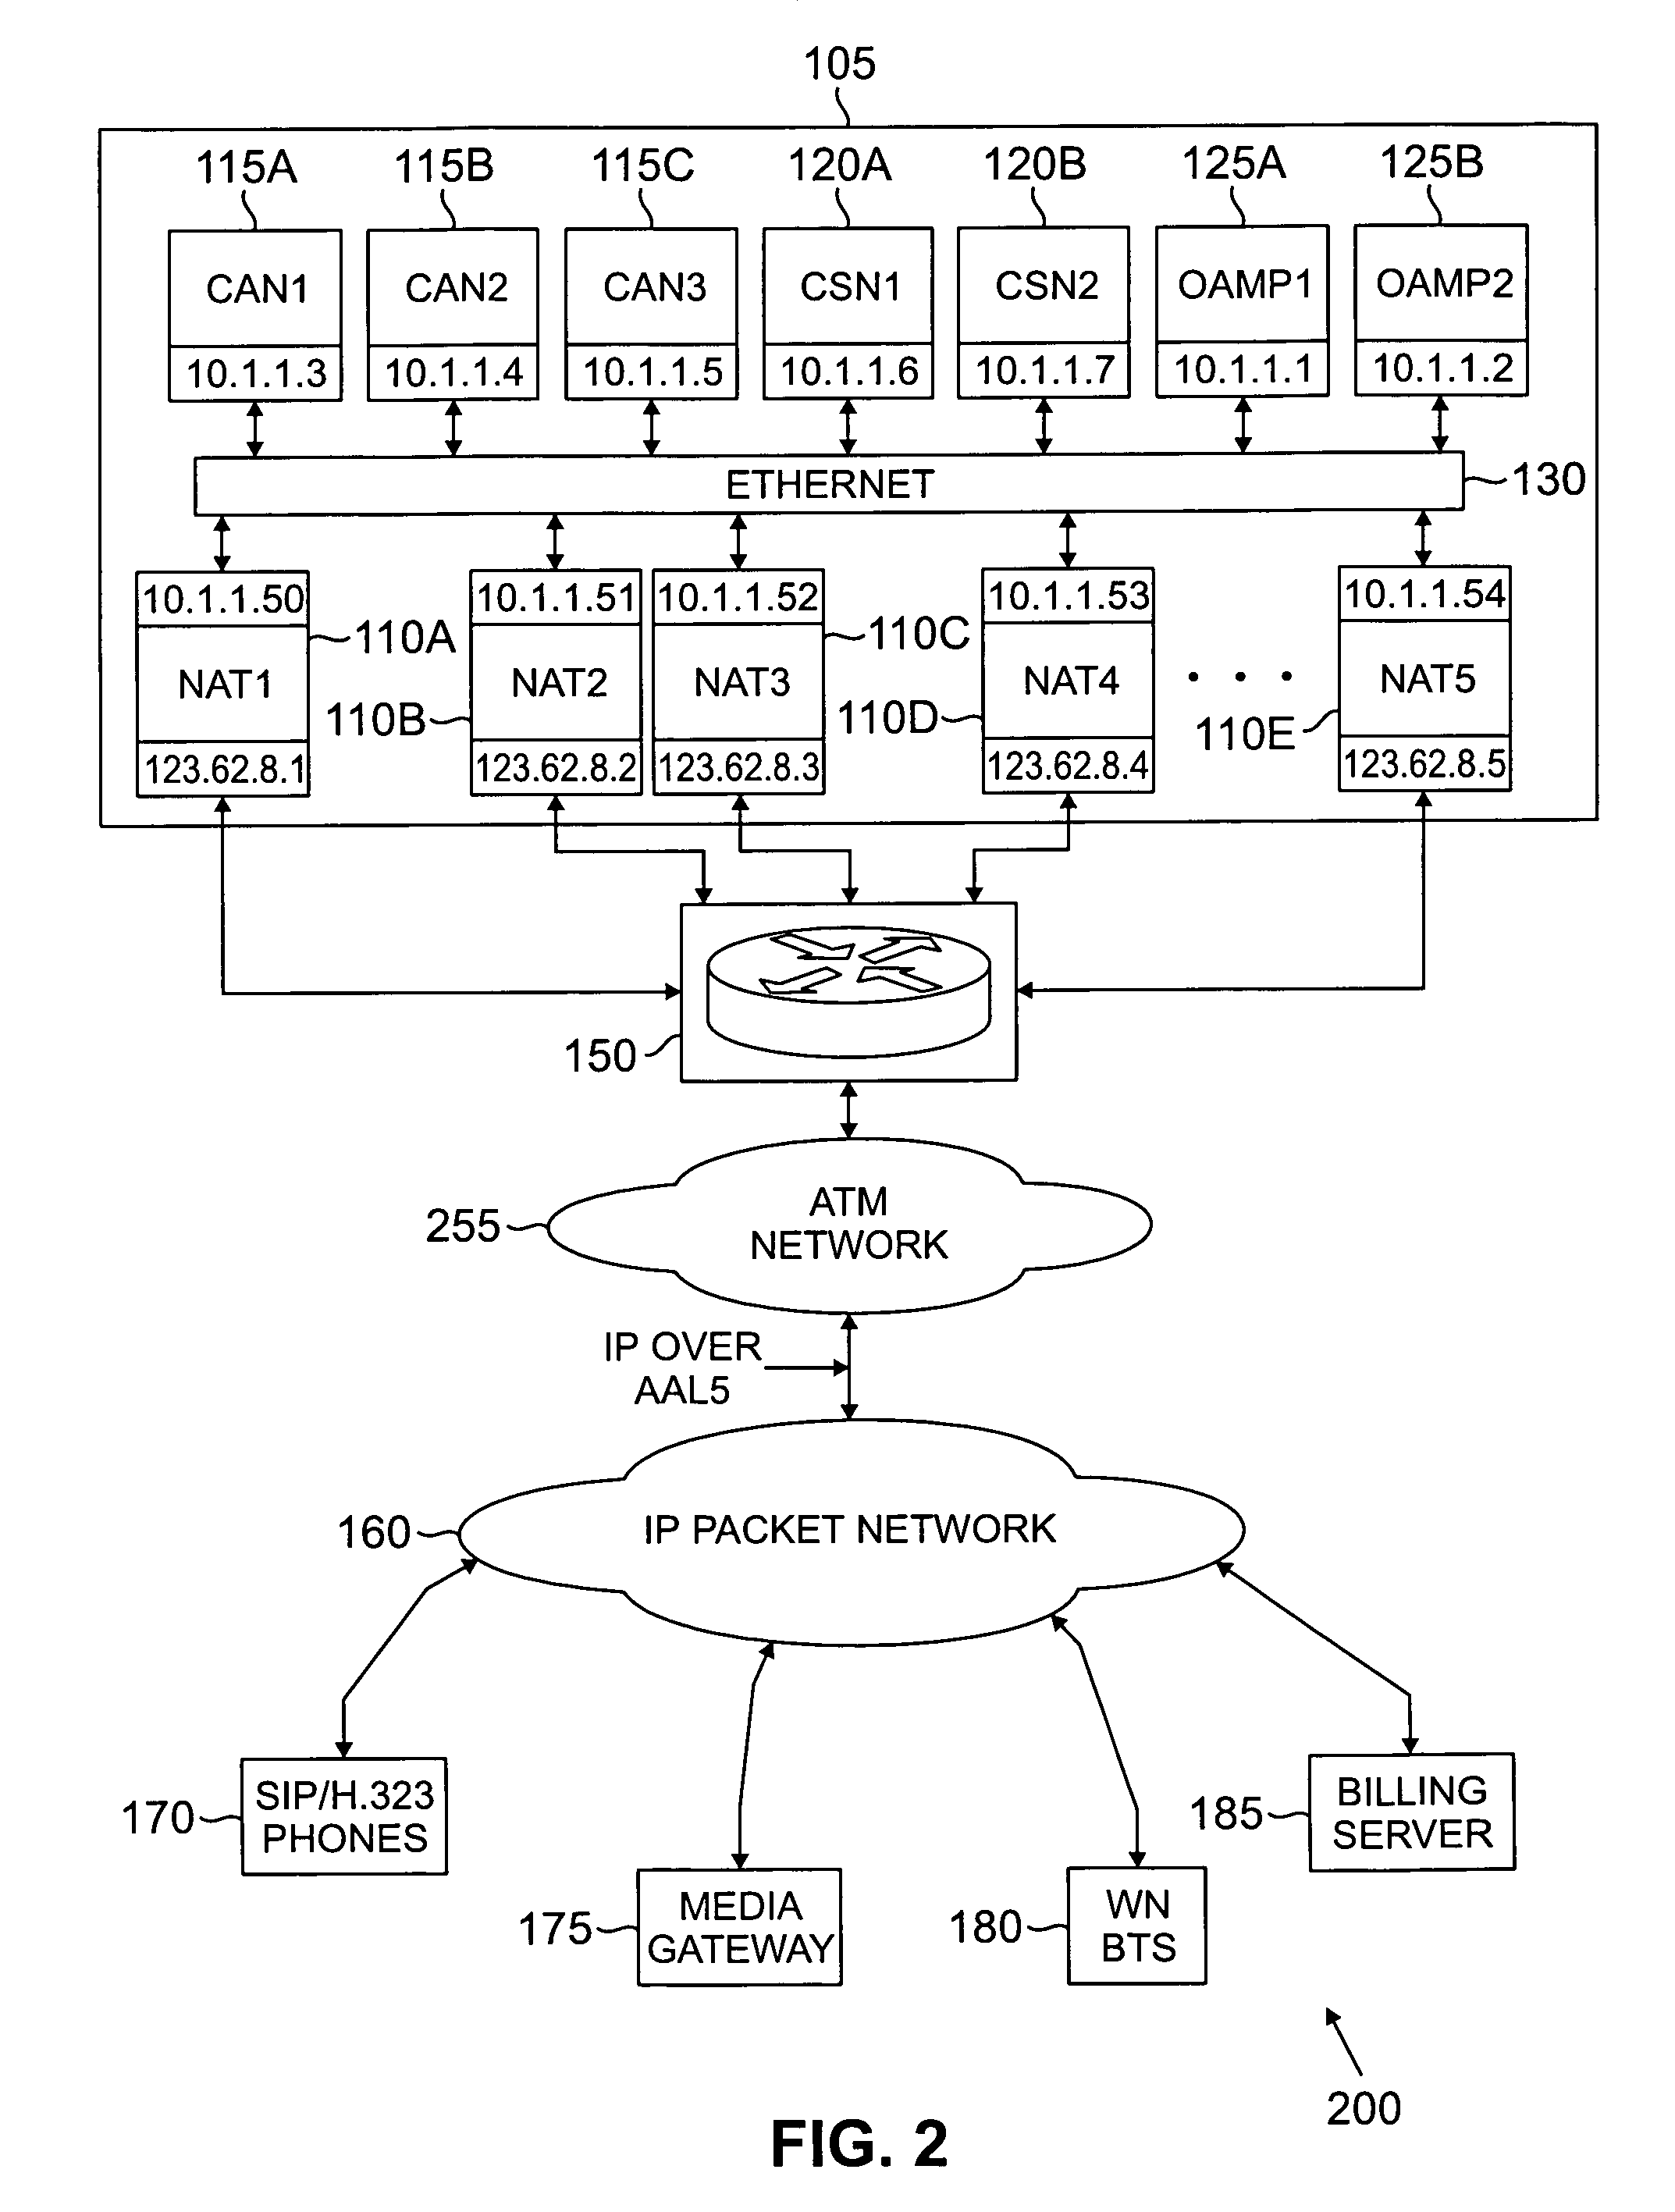 Soft switch using distributed firewalls for load sharing voice-over-IP traffic in an IP network